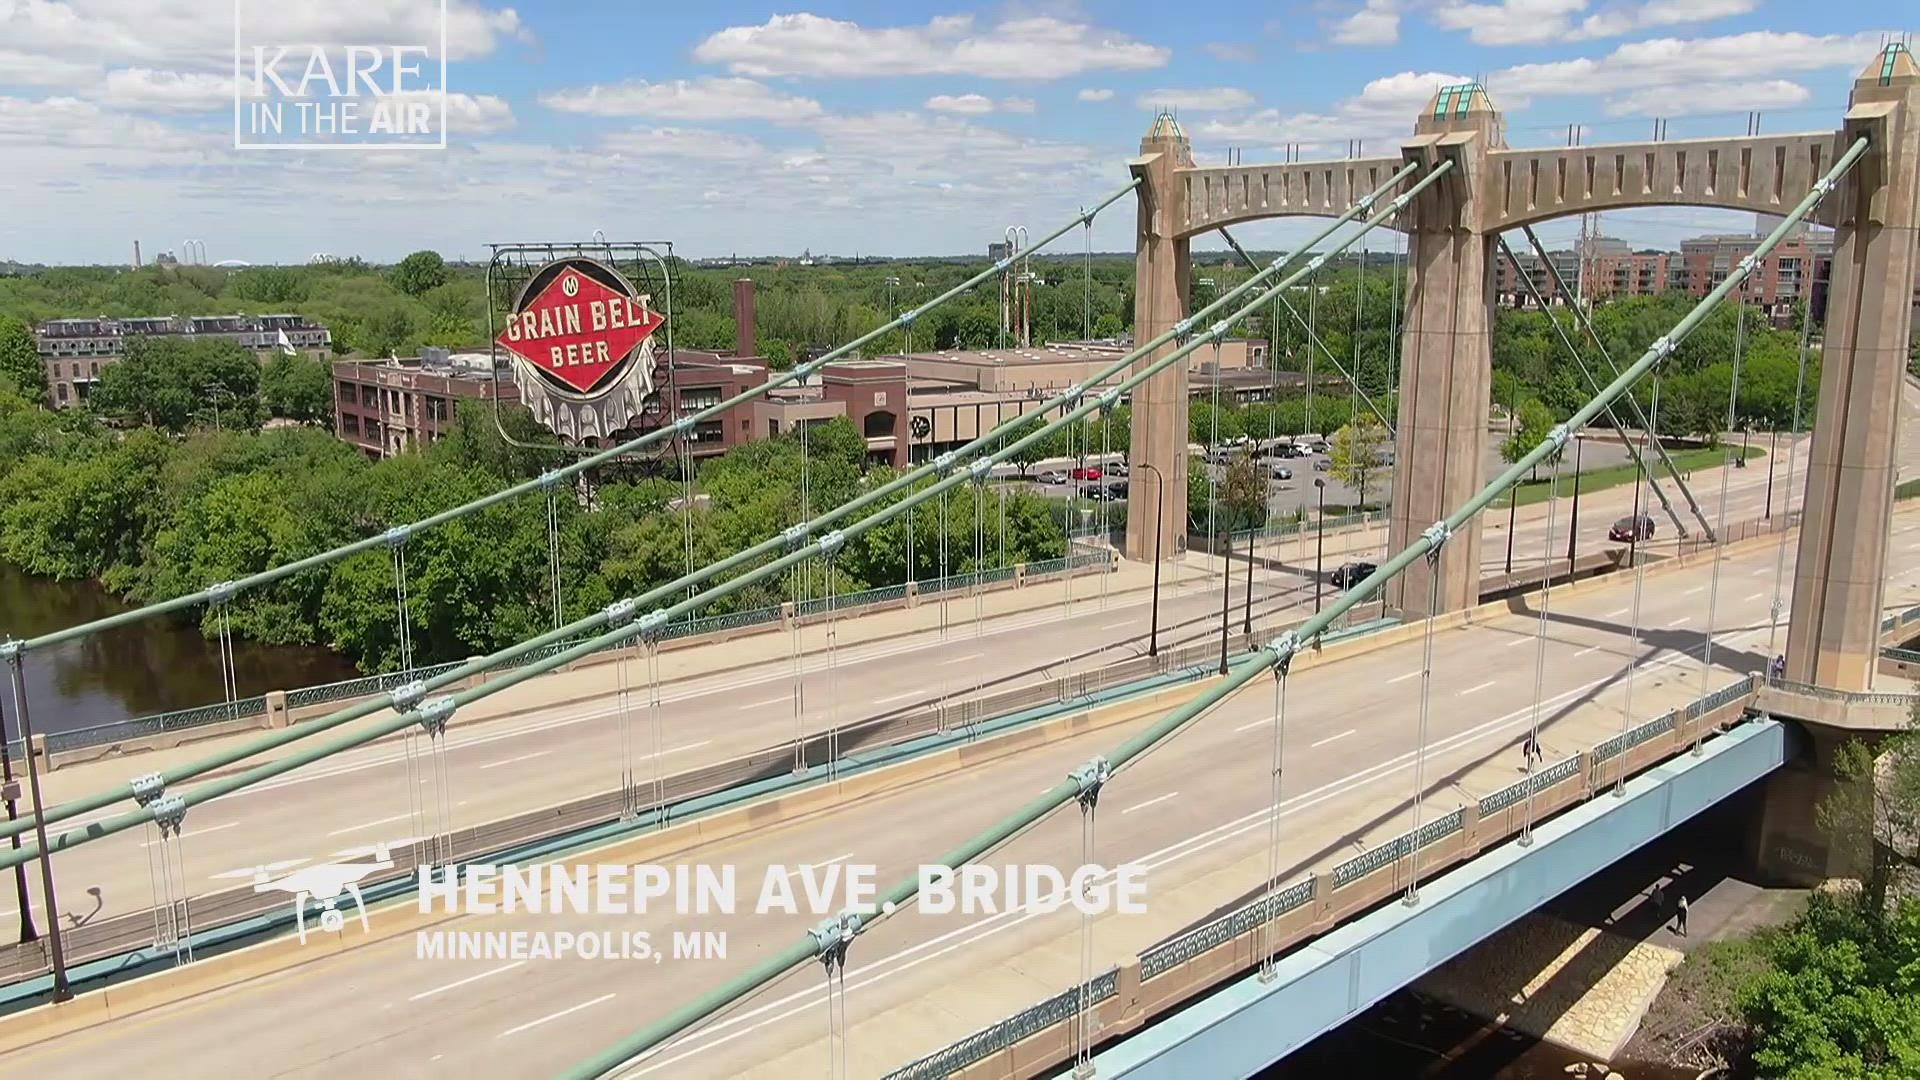 The Hennepin Ave. Bridge carries thousands of motorists between downtown and northeast Minneapolis every day. But a look from above makes the experience more serene.